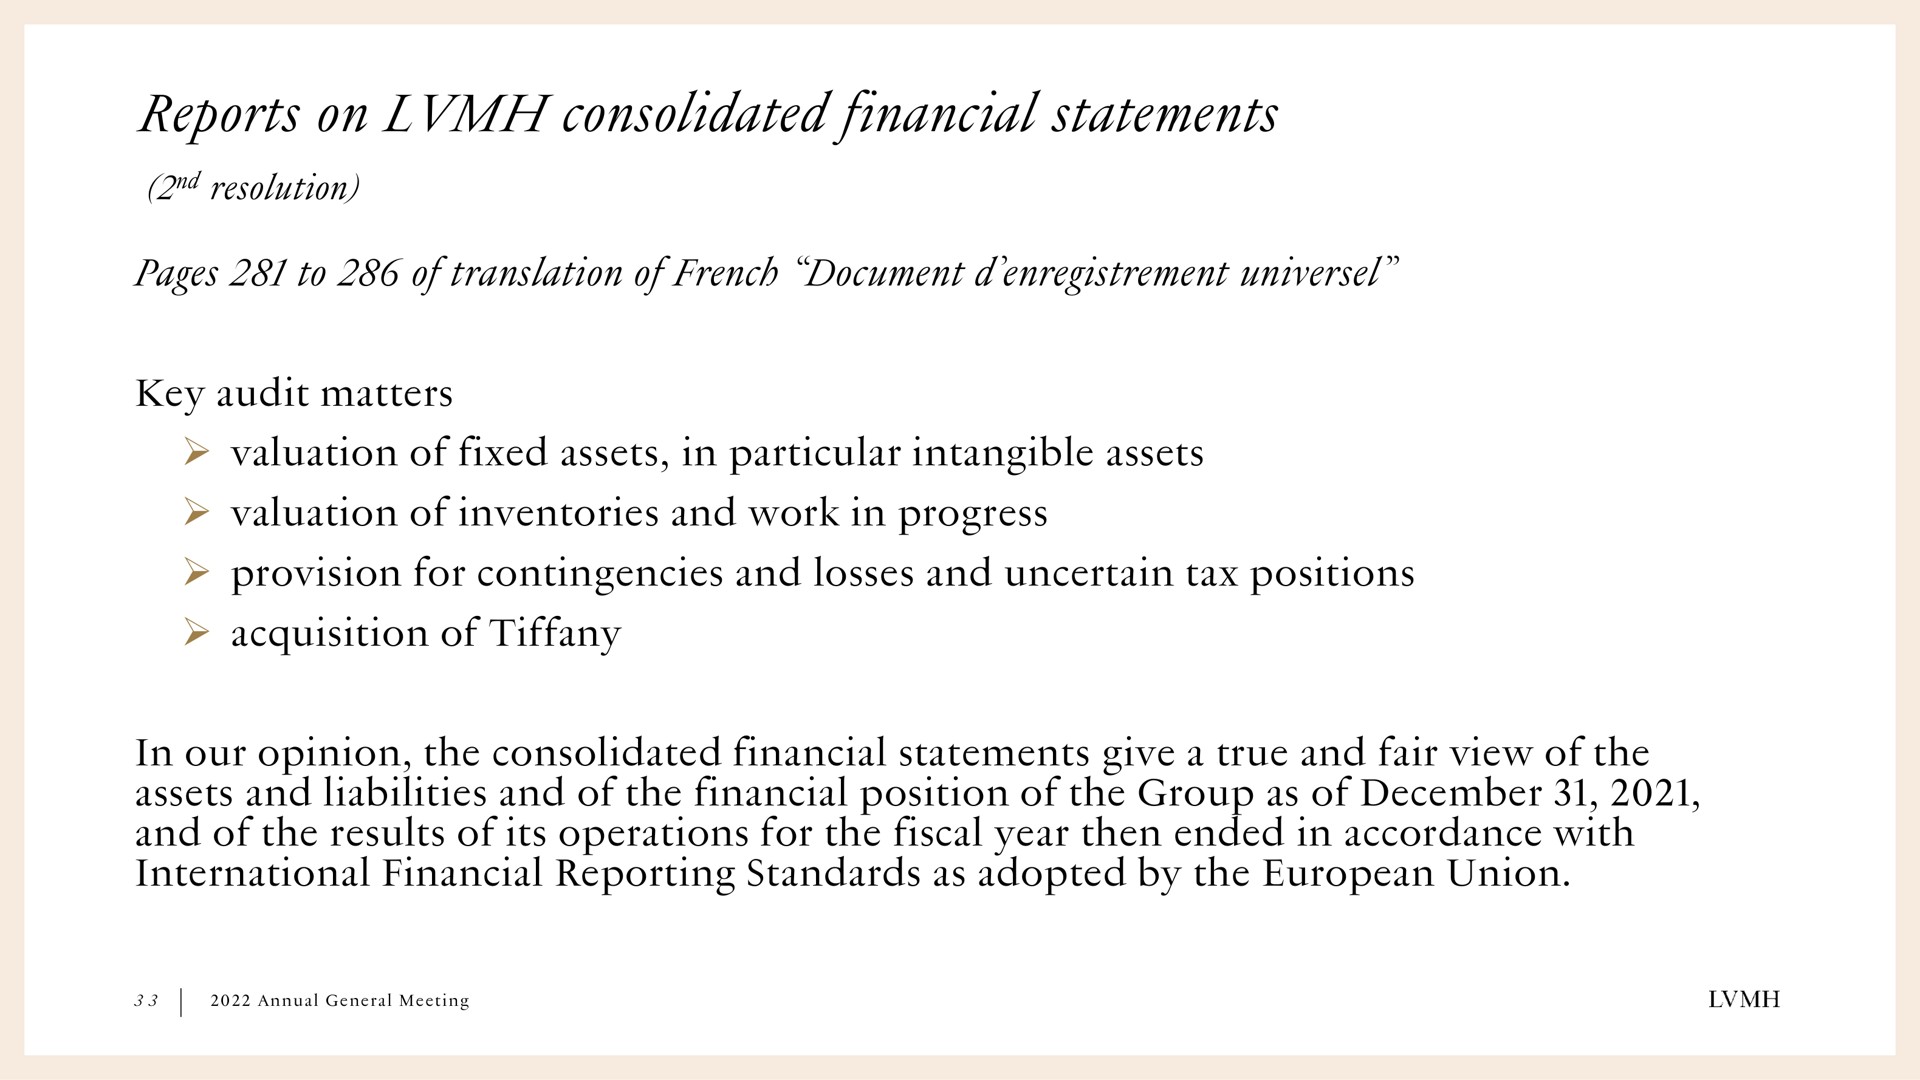 reports on consolidated financial statements | LVMH